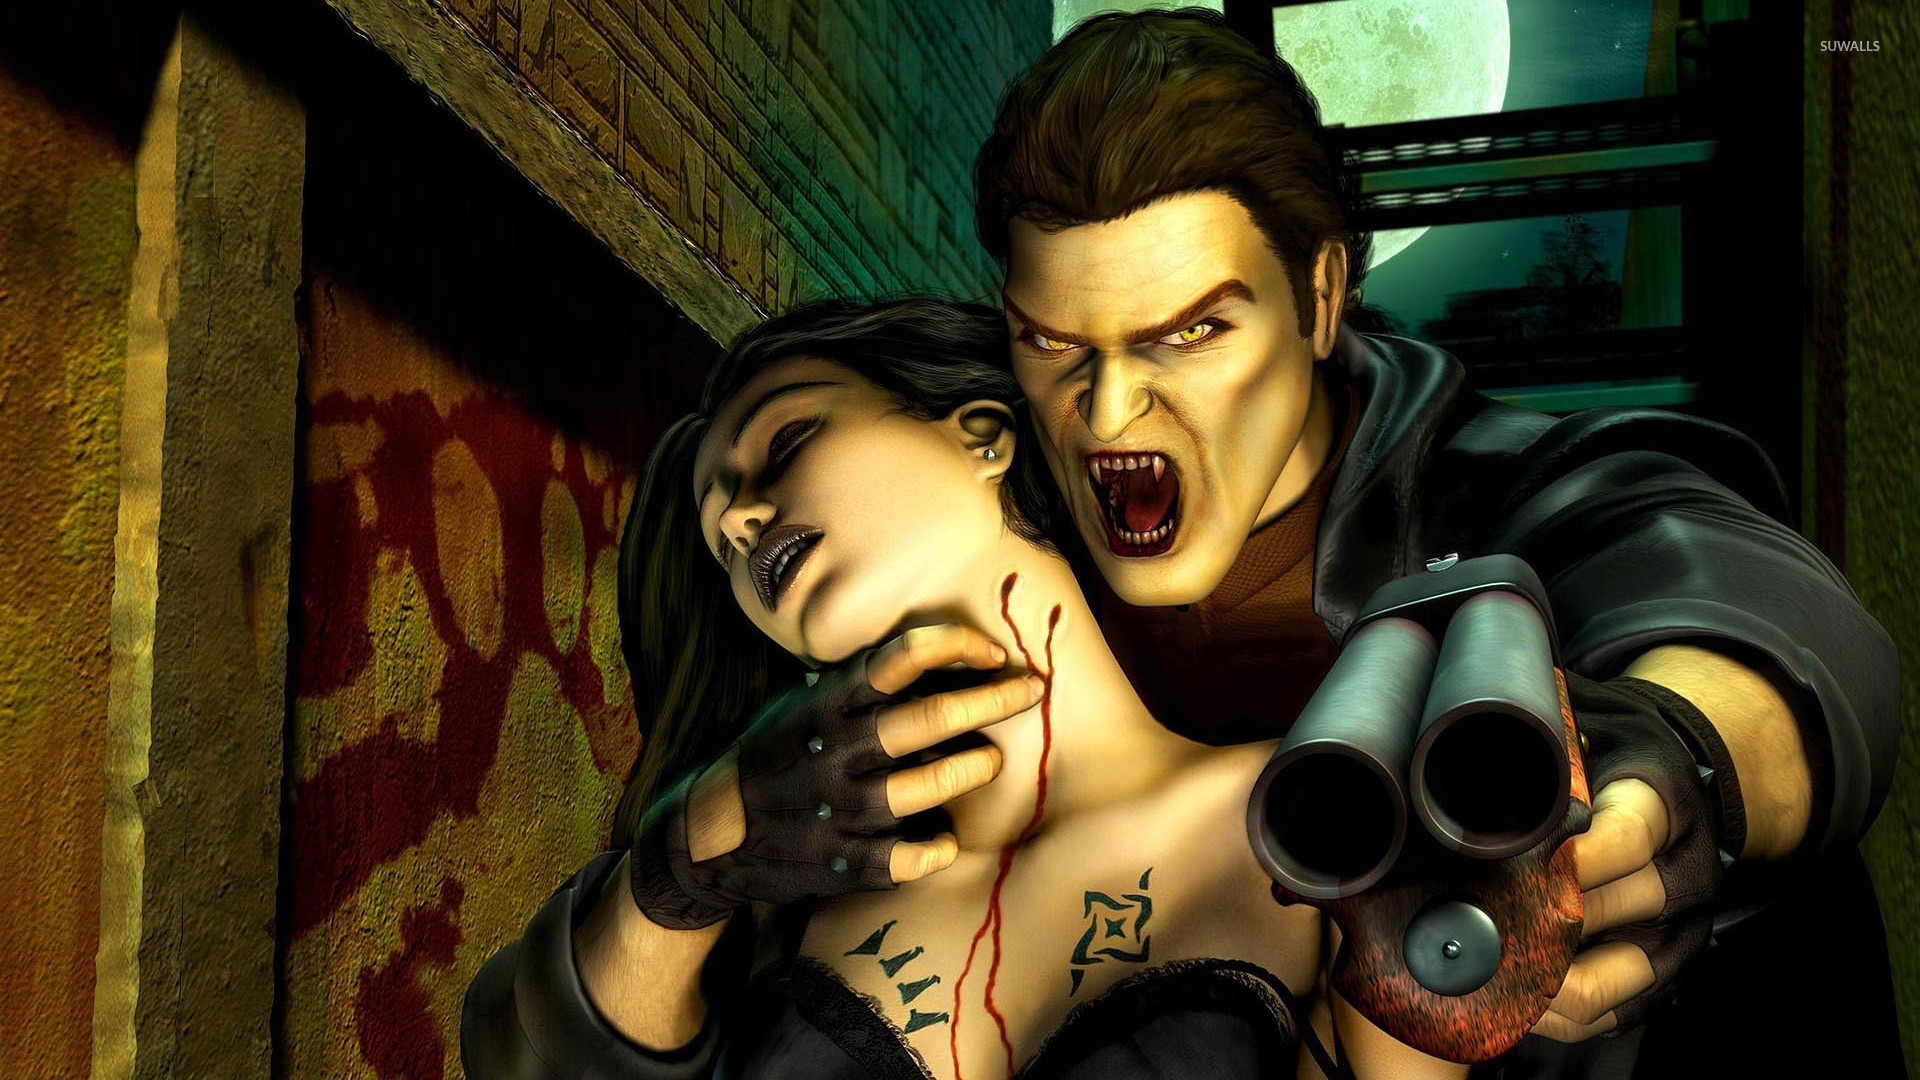 A vampire points a gun at the camera while he bares his fangs, holding a bleeding victim in his right hand, in one of the best vampire games, Vampire: The Masquerade Redemption 